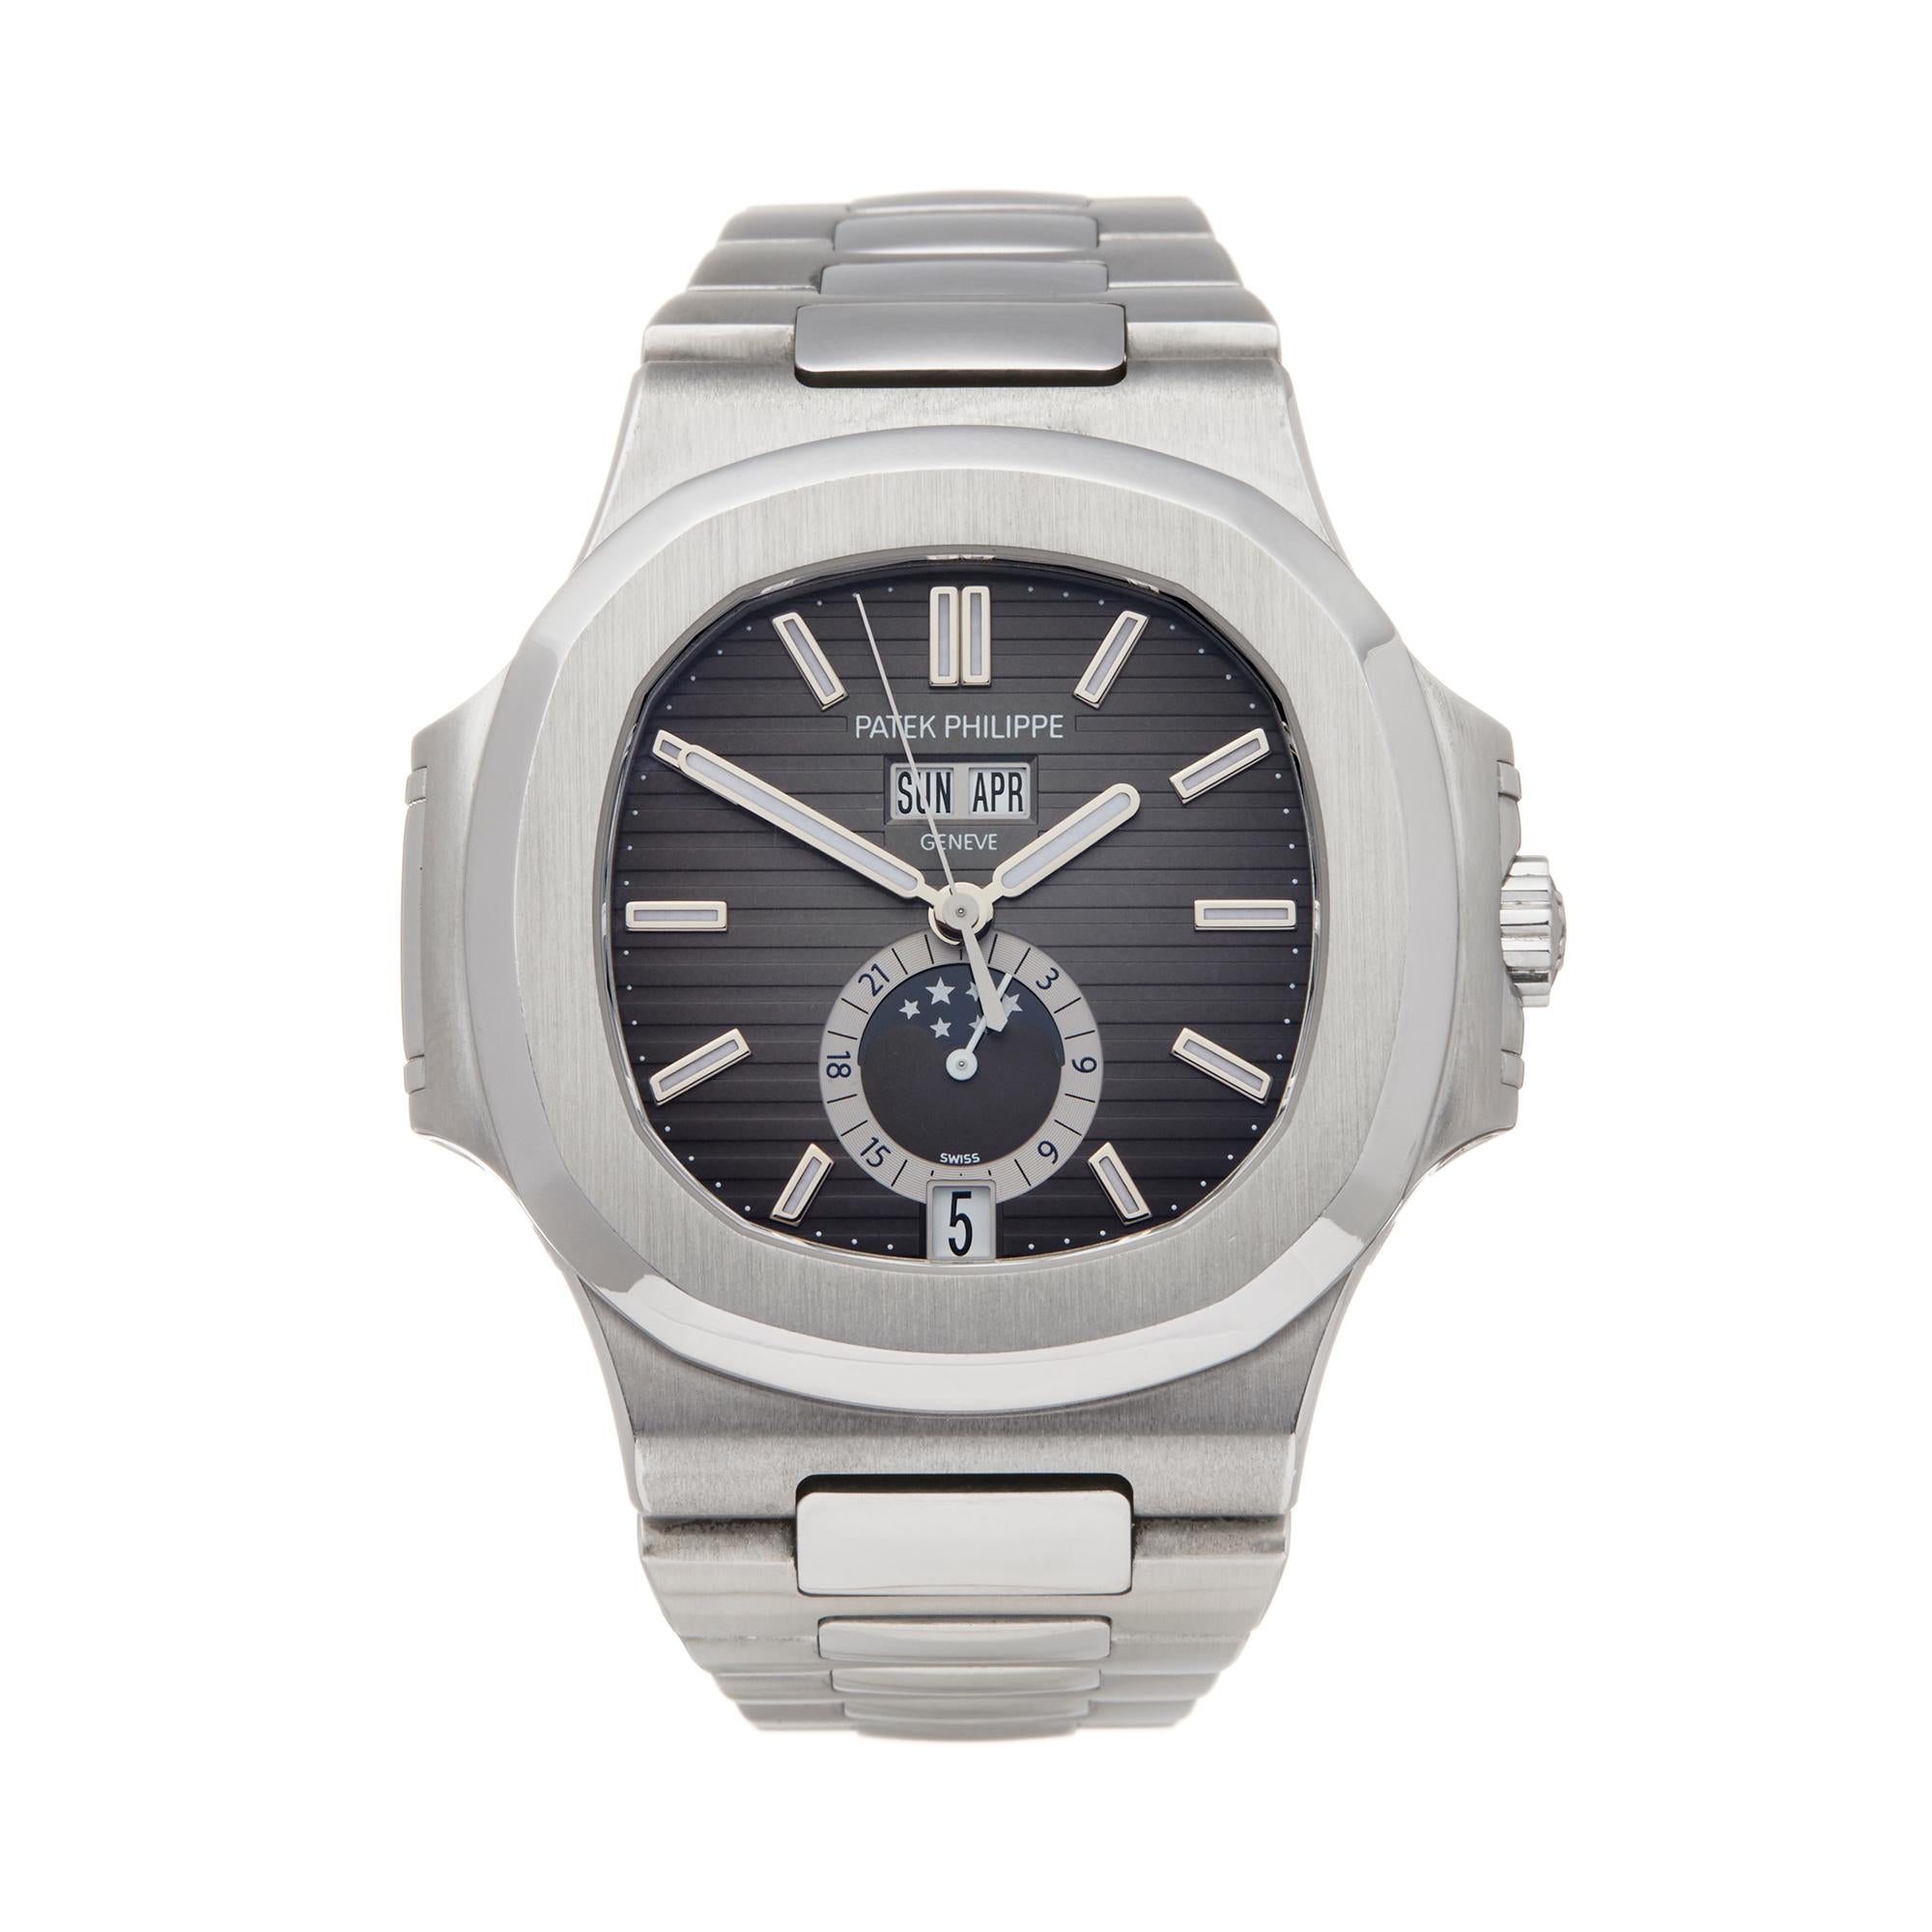 Reference: W5784
Manufacturer: Patek Philippe
Model: Nautilus
Model Reference: 5726/1A-001
Age: 2nd September 2015
Gender: Men's
Box and Papers: Box Manuals and Guarantee
Dial: Grey Baton
Glass: Sapphire Crystal
Movement: Automatic
Water Resistance: